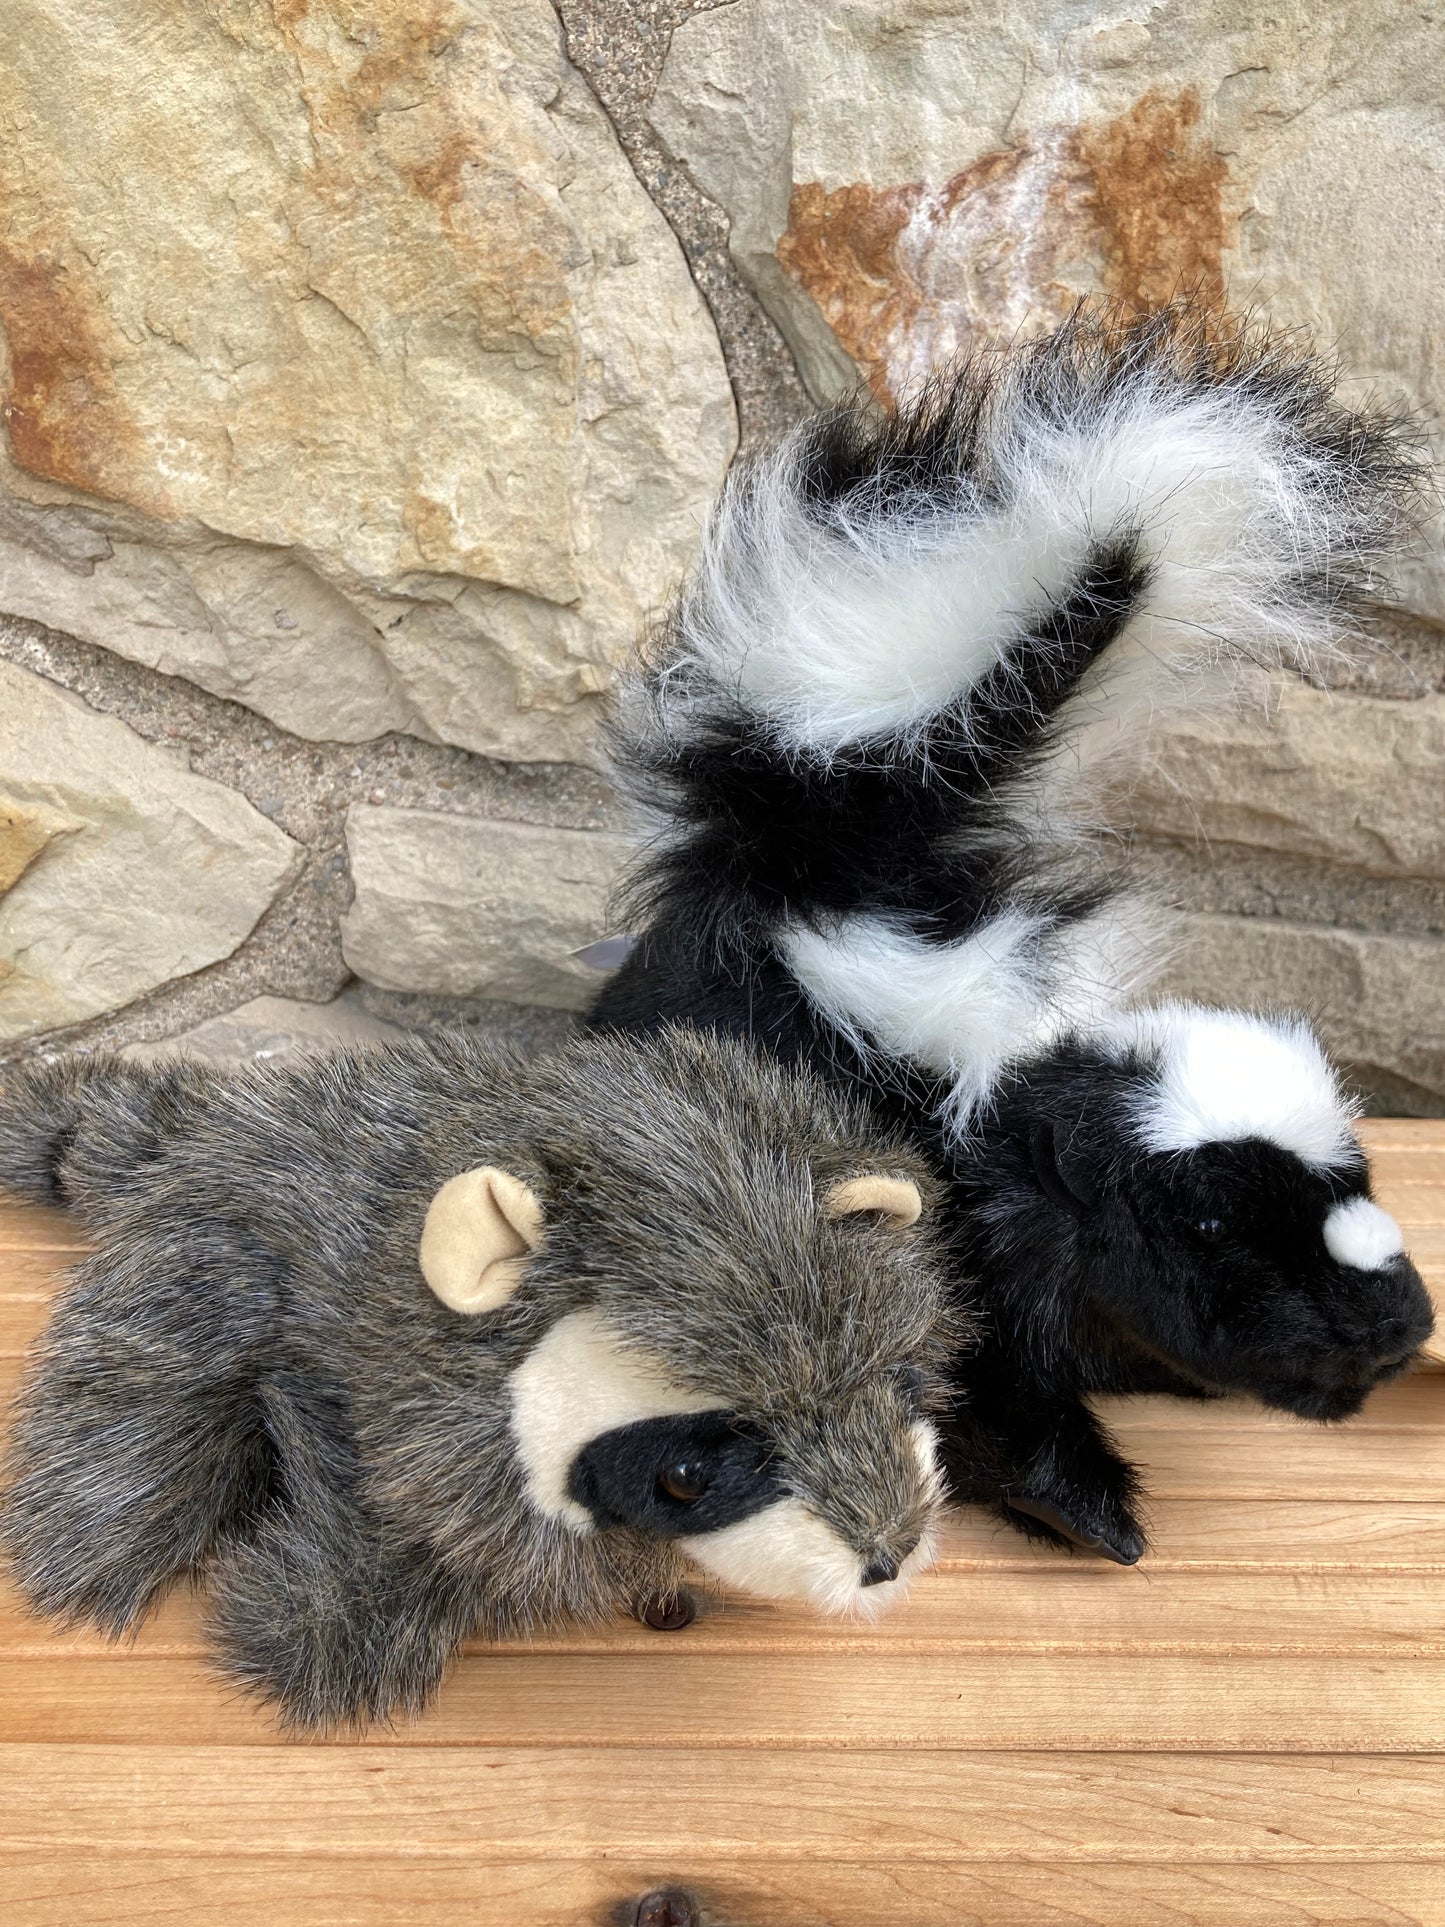 Soft Puppet Toy - Baby RACOON Hand Puppet